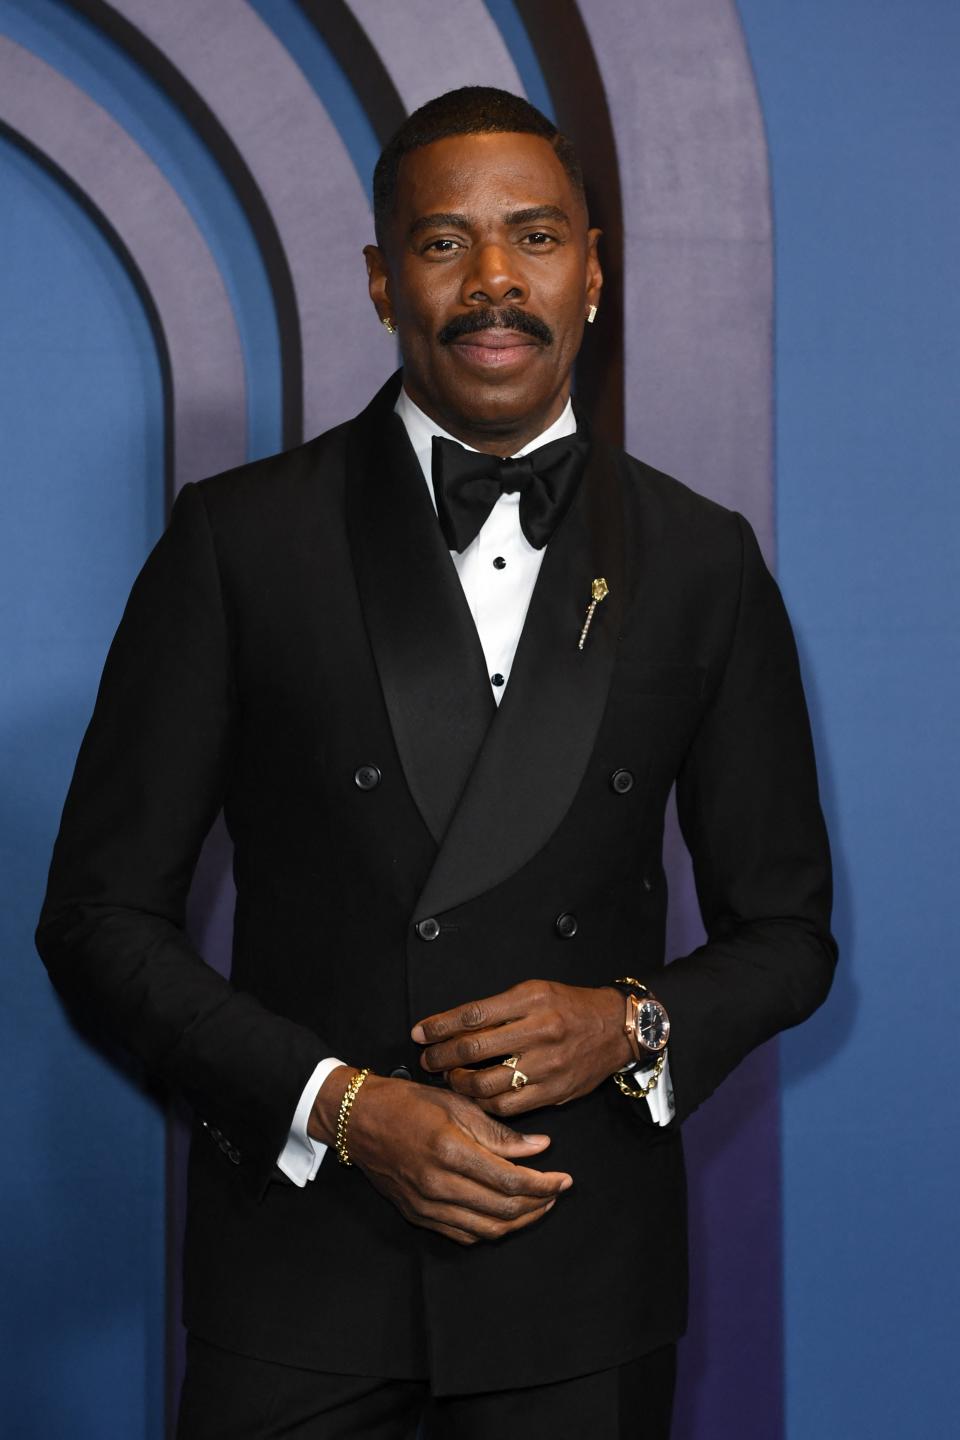 Colman Domingo in a tuxedo with a bow tie and small pin on his lapel, posing at an event